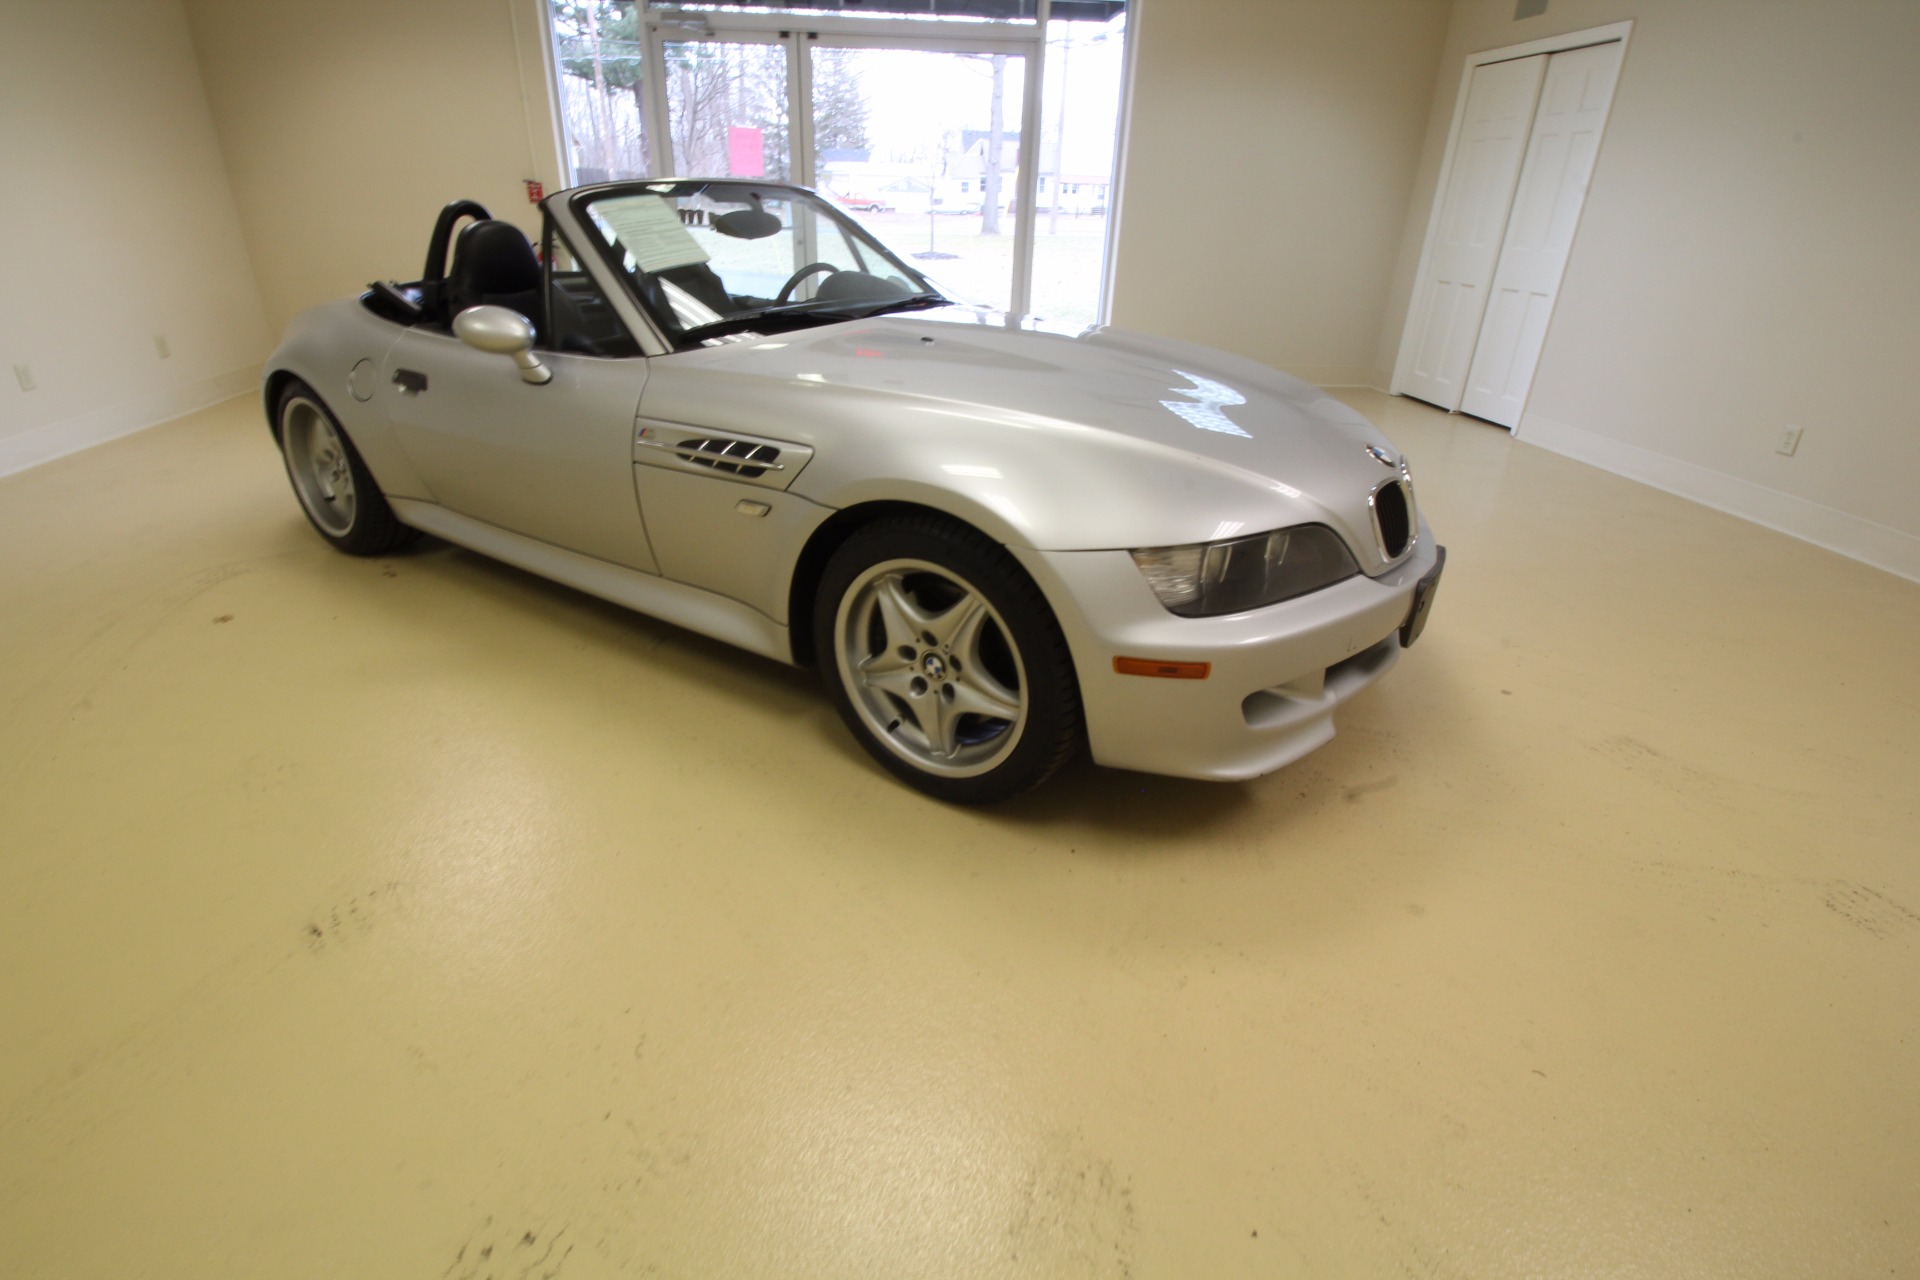 Used 2000 Titanium Silver Metallic with Black Top BMW M Roadster Base | Albany, NY